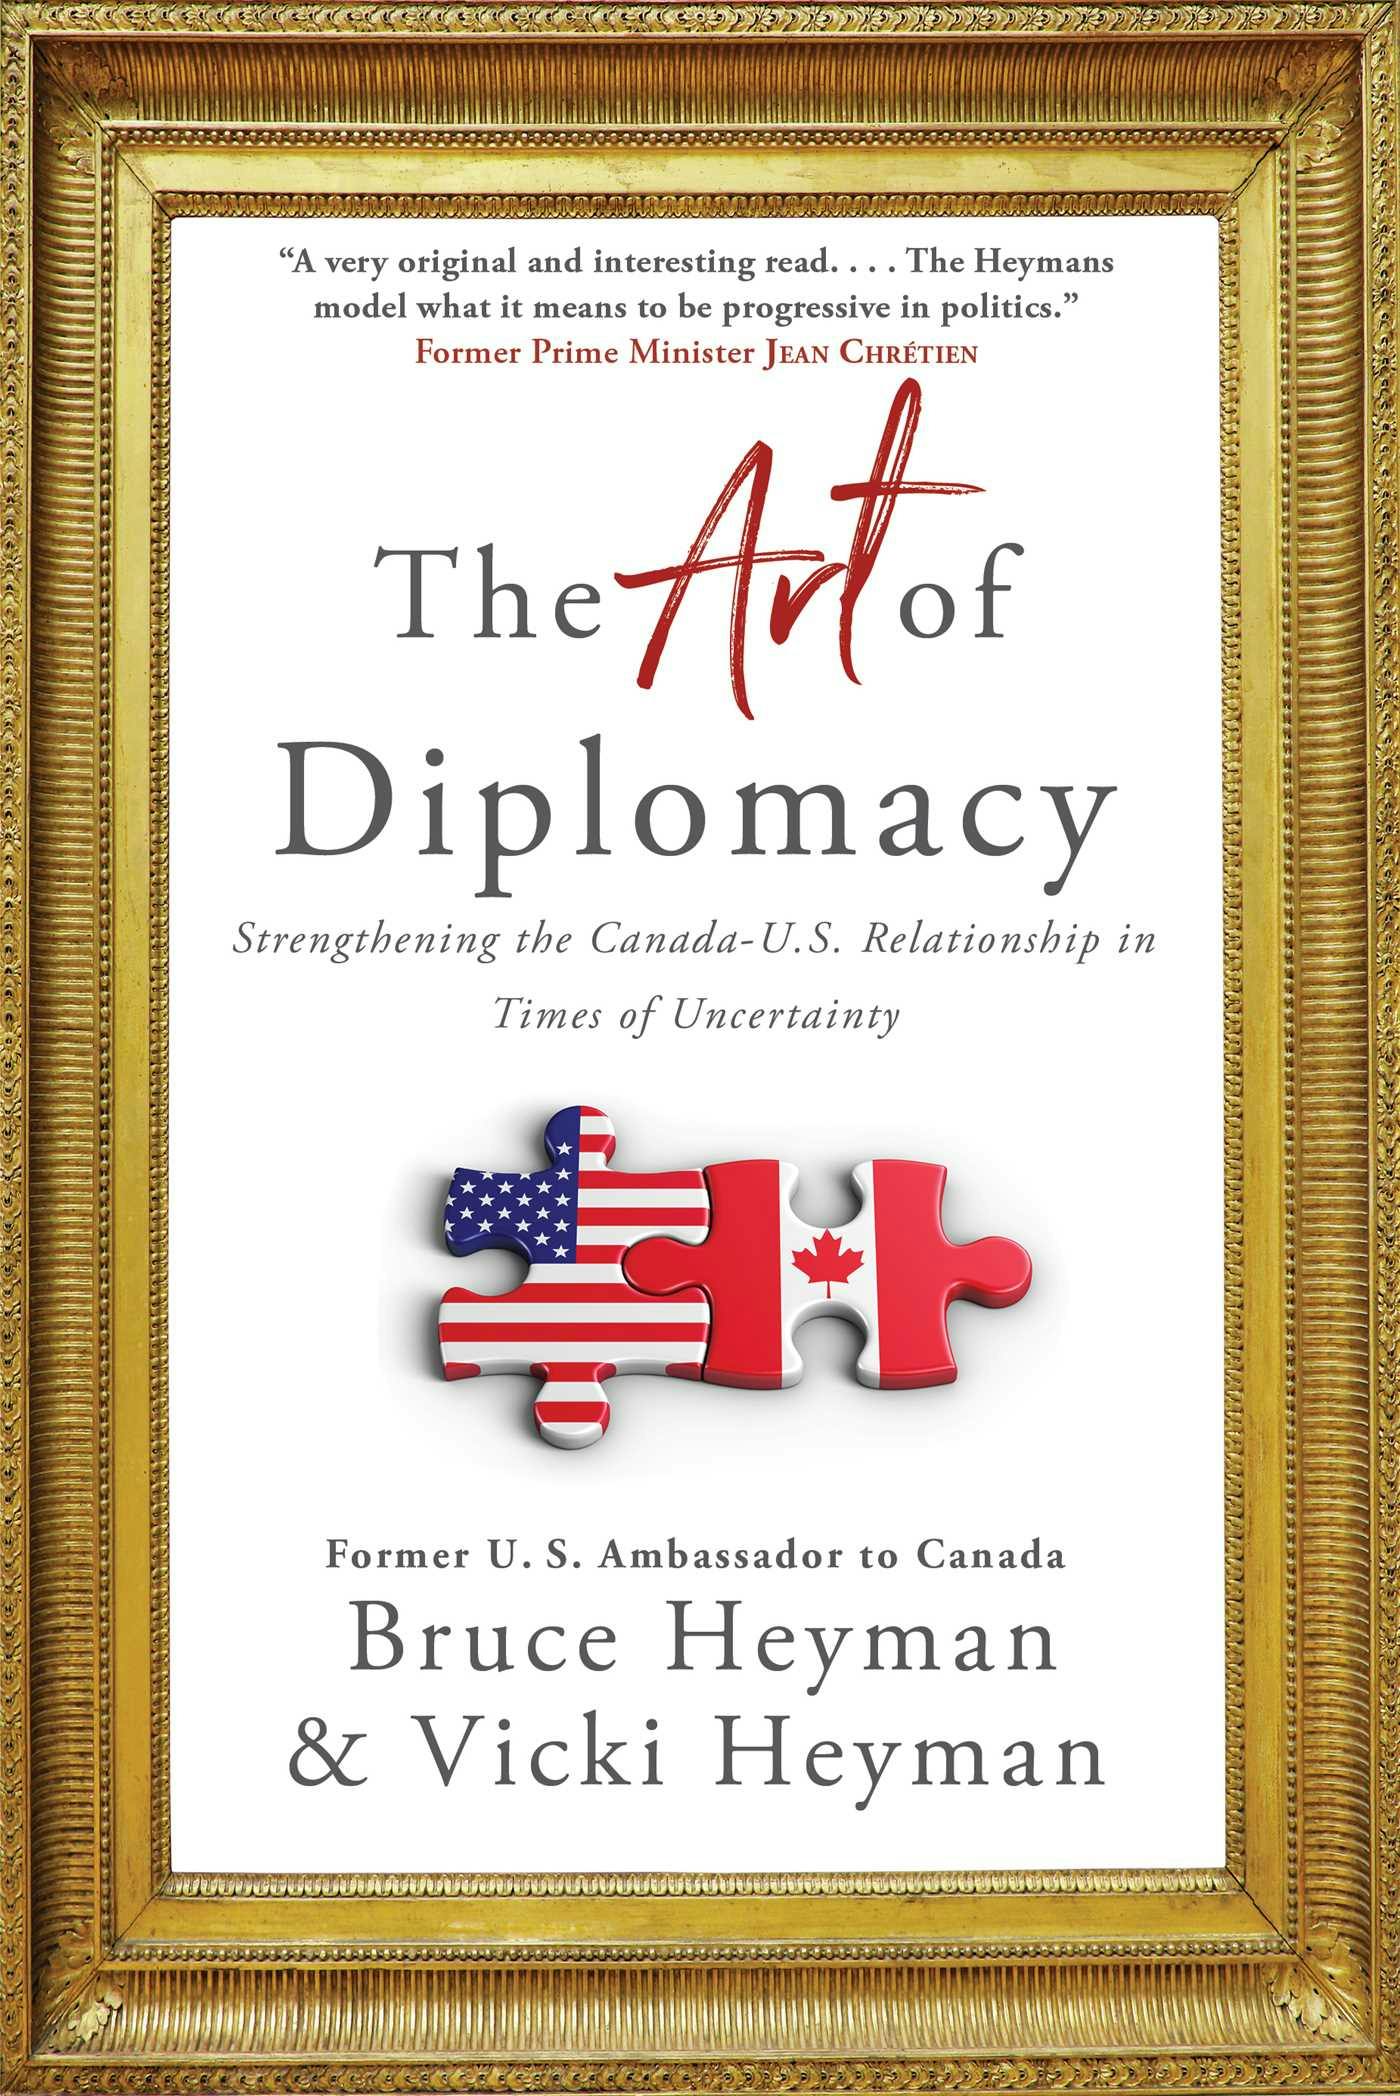 The Art of Diplomacy: Strengthening the Canada-U.S. Relationship in Times of Uncertainty - Vicki Heyman, Bruce Heyman